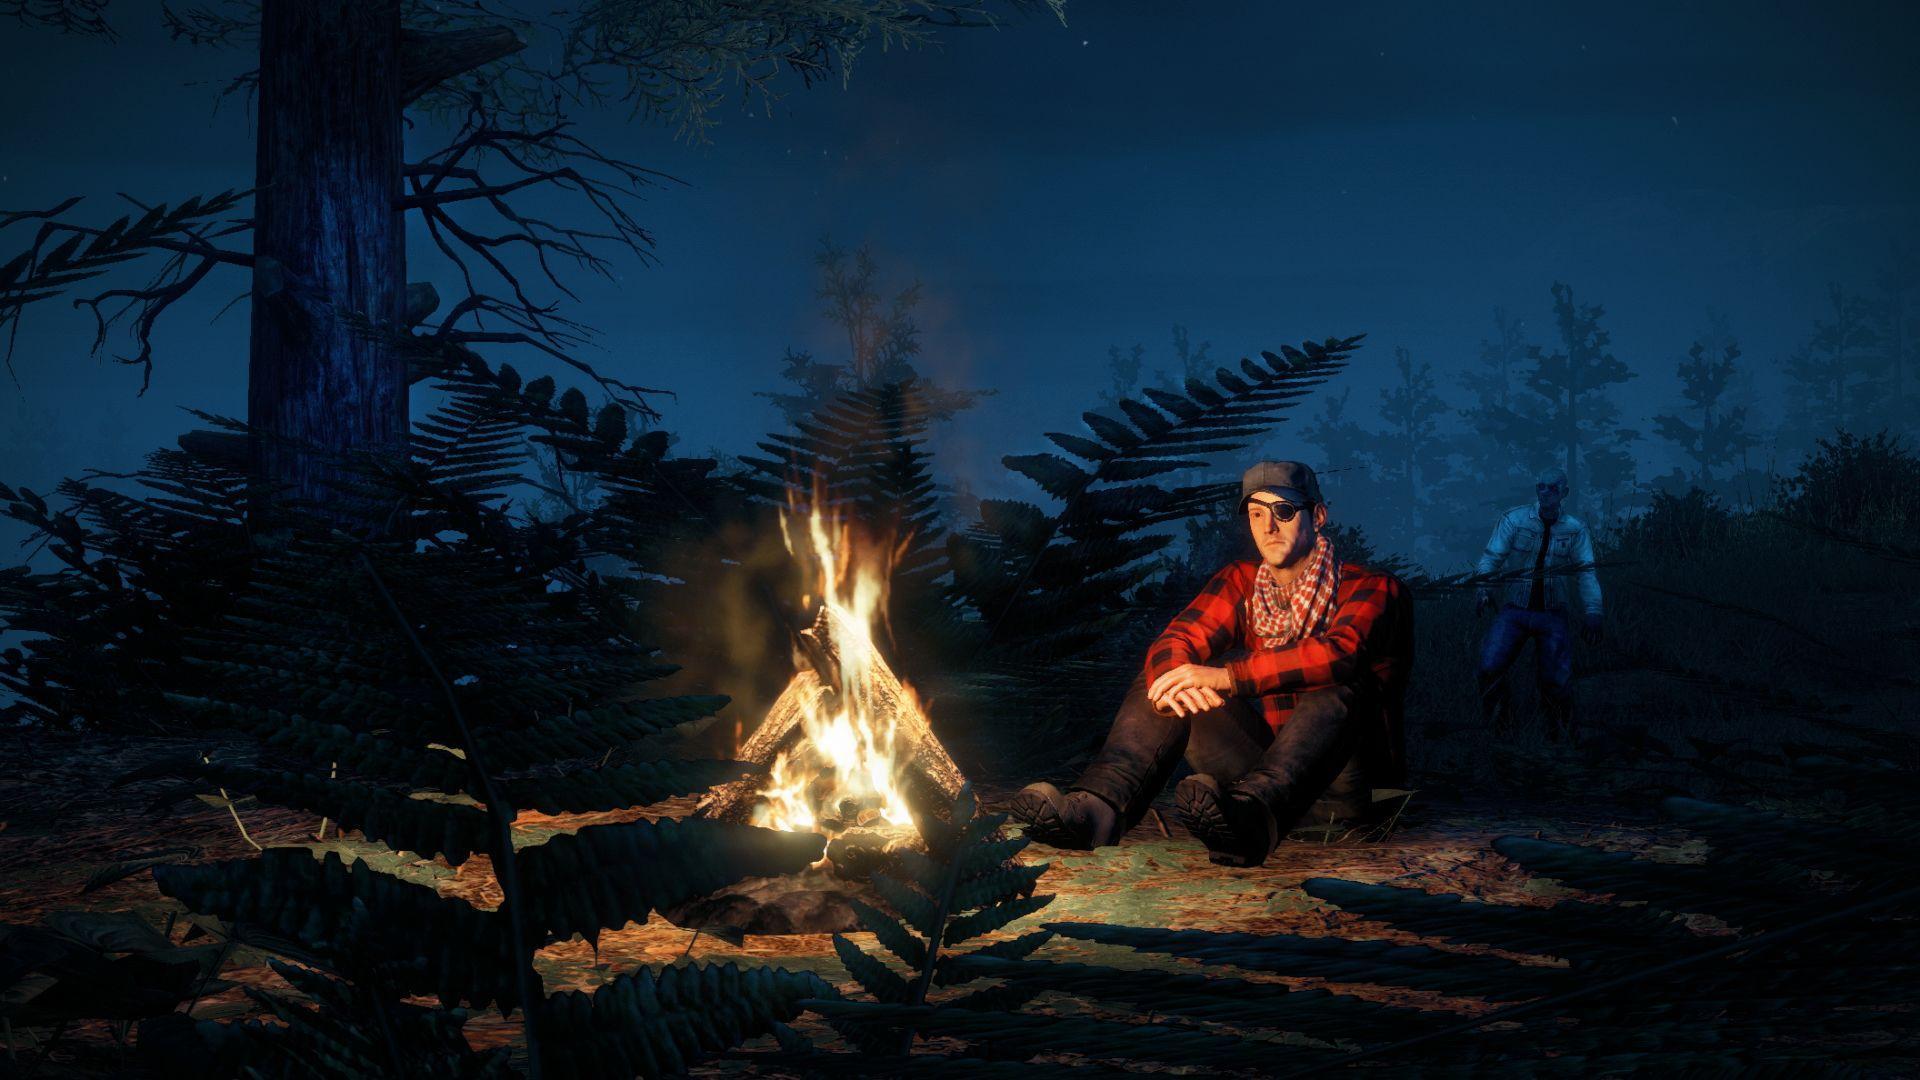 H1Z1 branching off into two separate games, 'H1Z1: Just Survive